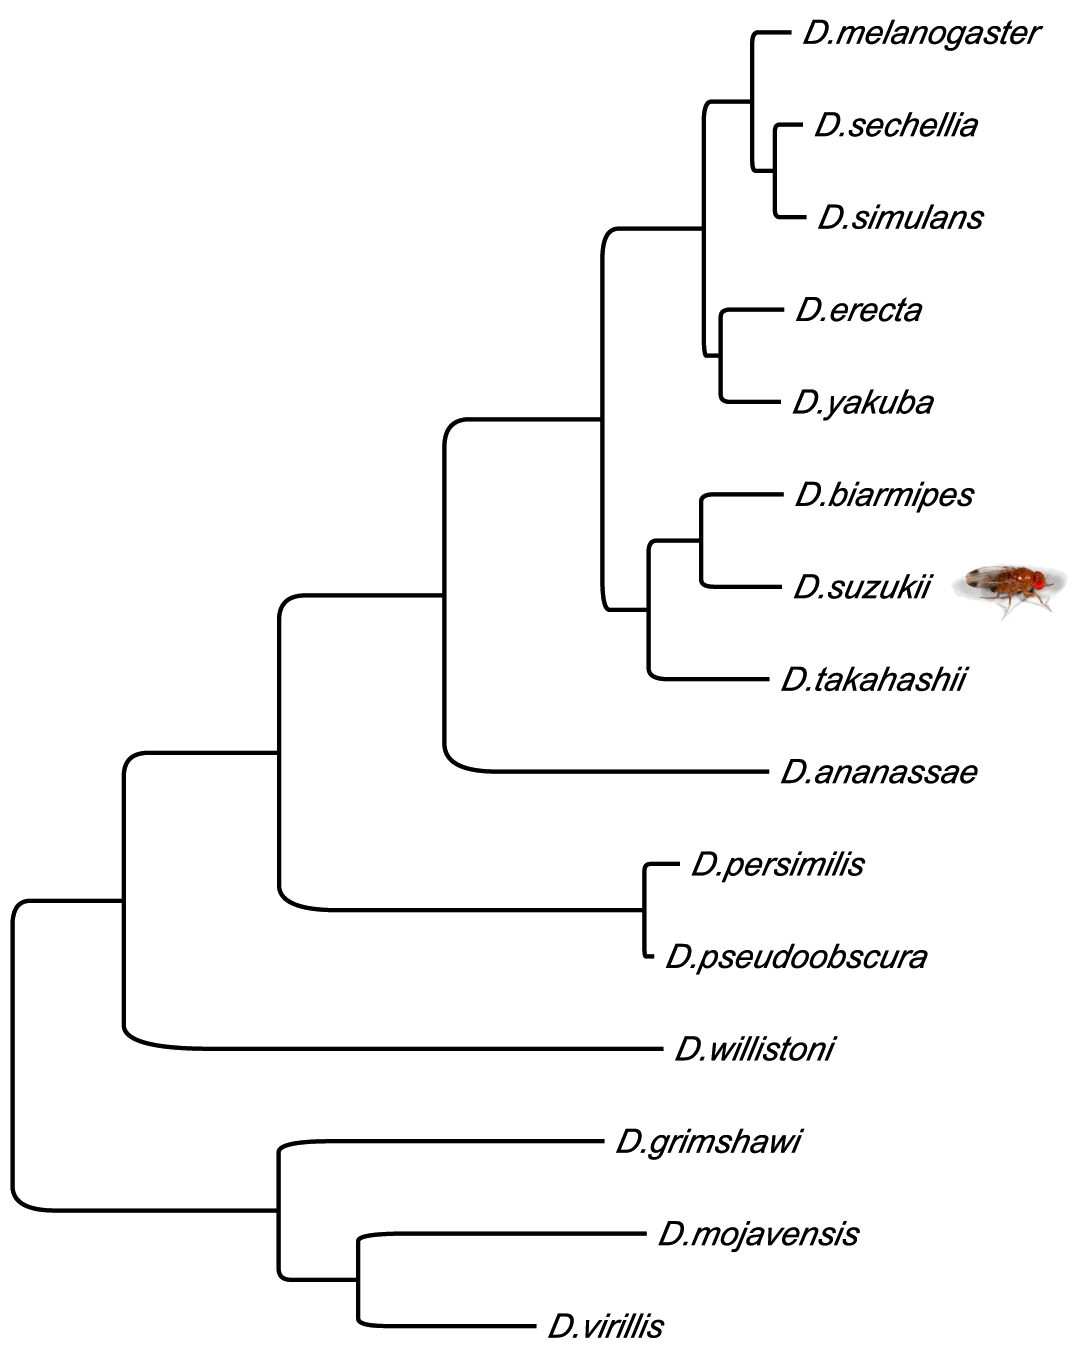 Best-scoring maximum likelihood (ML) tree of 15 Drosophila species + outgroup A.gambiae (not shown) using 5,322 gene partitions with 5,199,249 sites.  Model is JTTF+Γ.